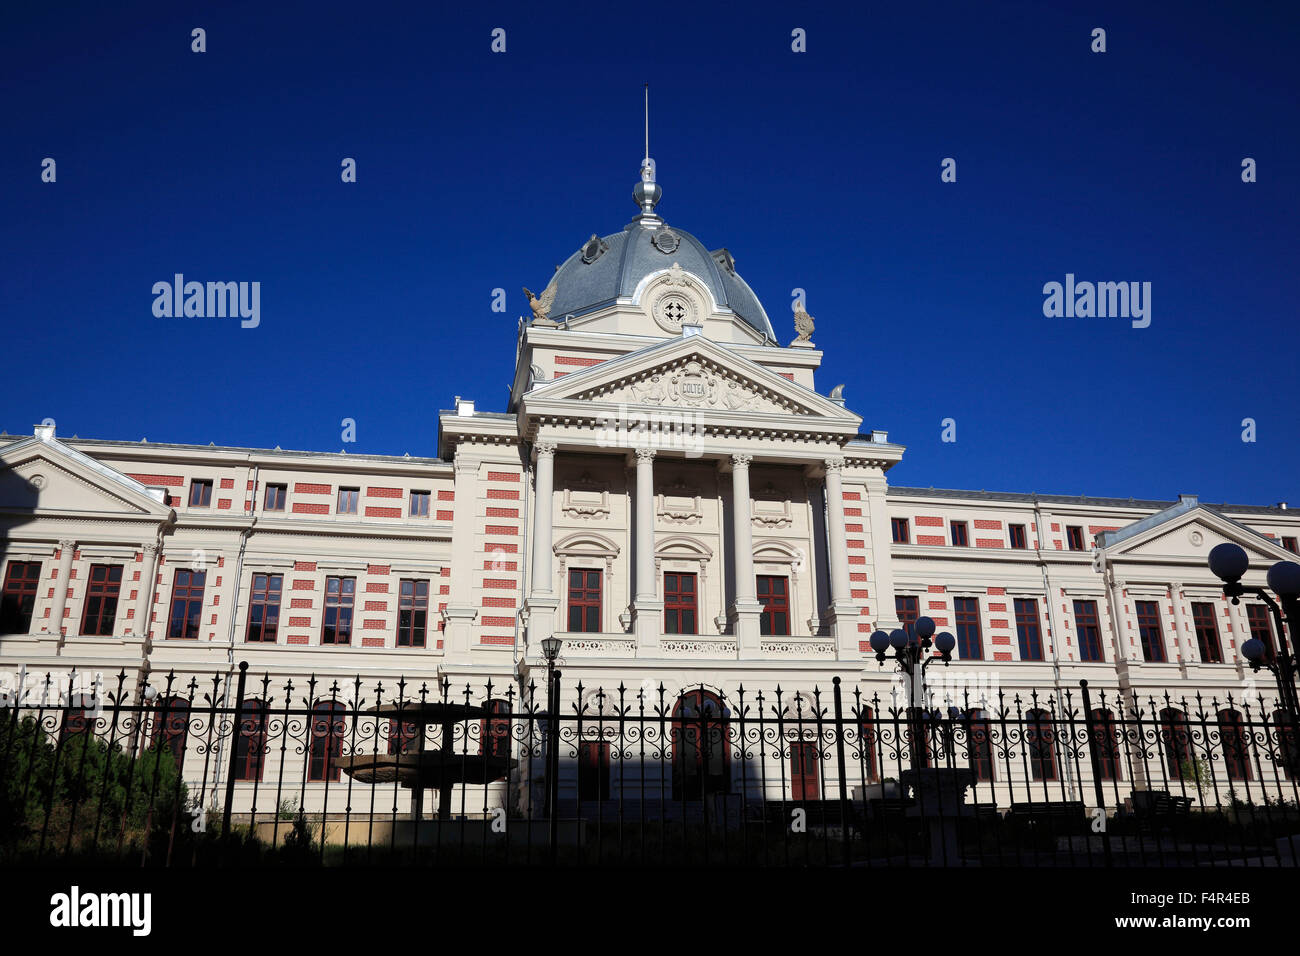 The Coltea Hospital in the center of Bucharest, Romania Stock Photo